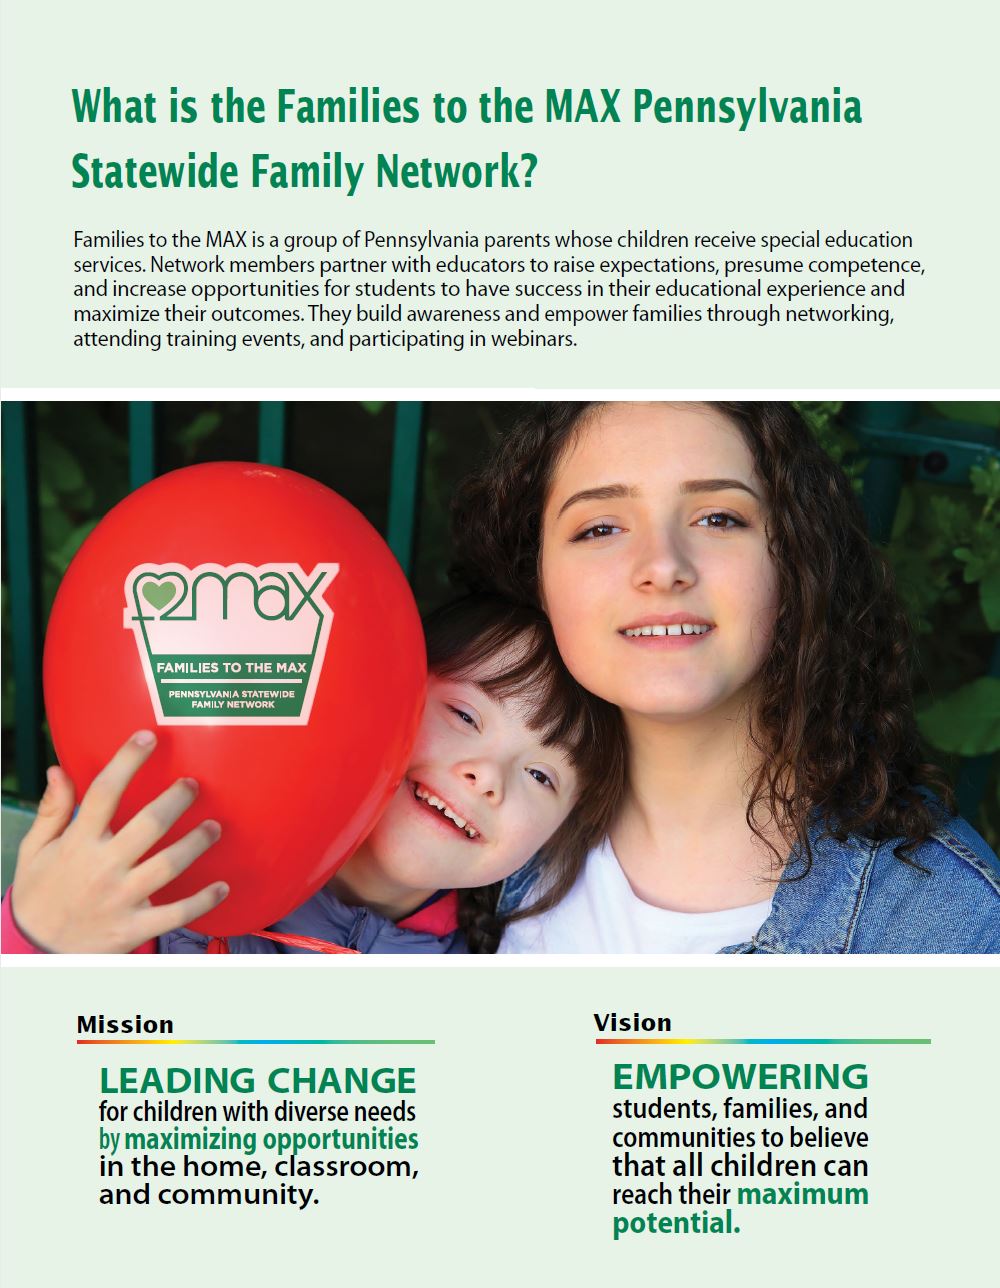 What is the Families to the MAX Pennsylvania Statewide Network?